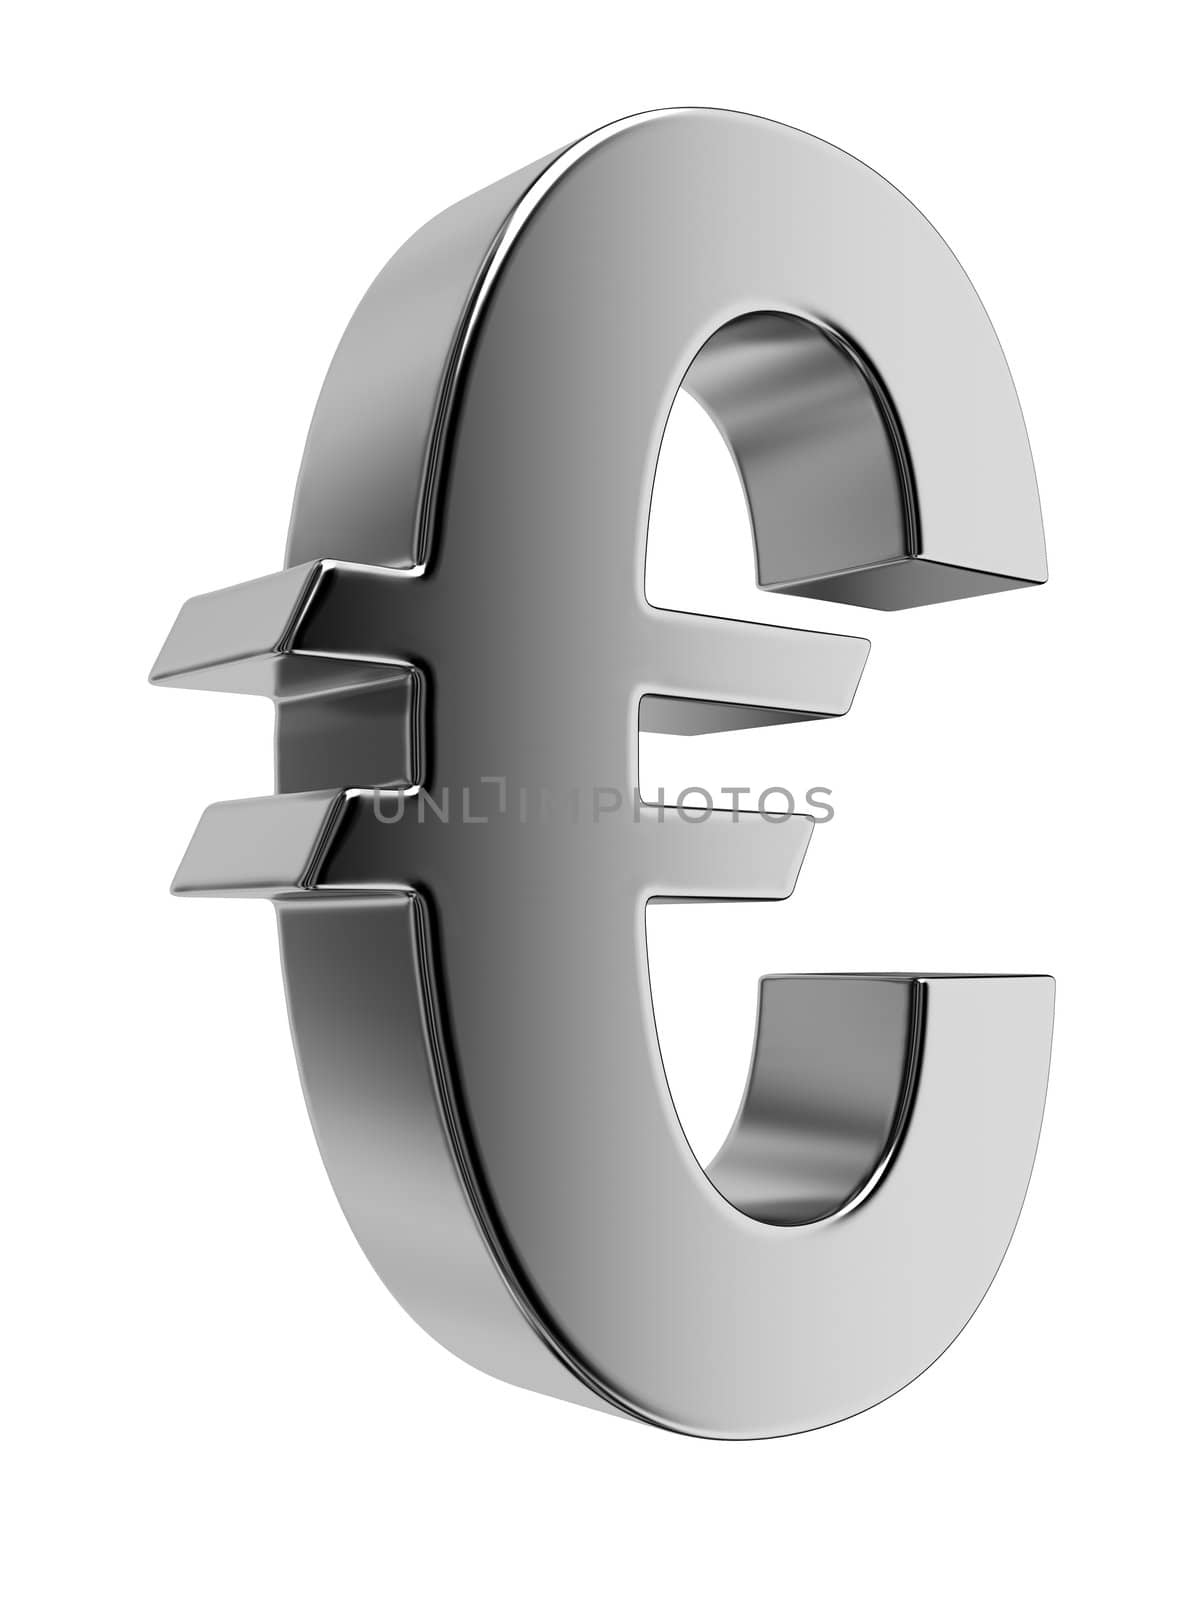 Shiny Euro sign by enderbirer